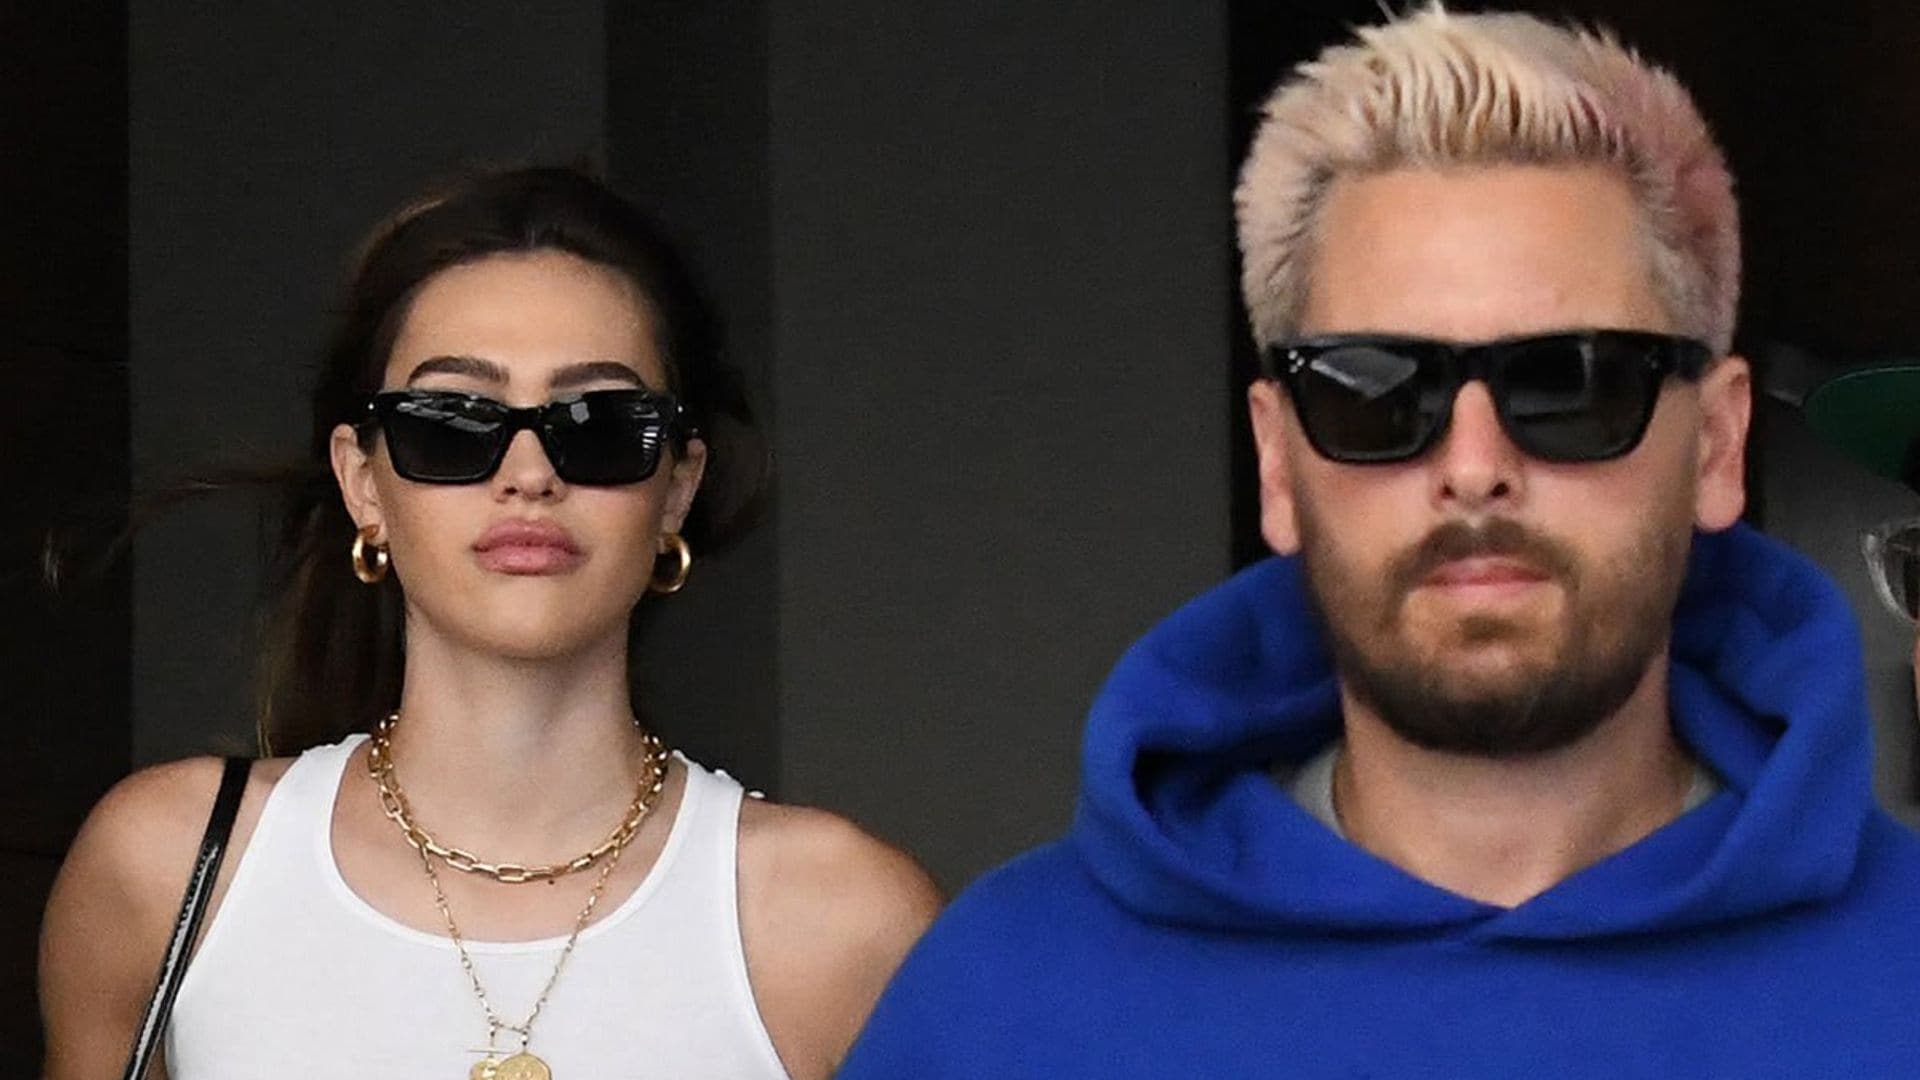 Scott Disick is dating again after ‘unexpected’ breakup with Amelia Hamlin